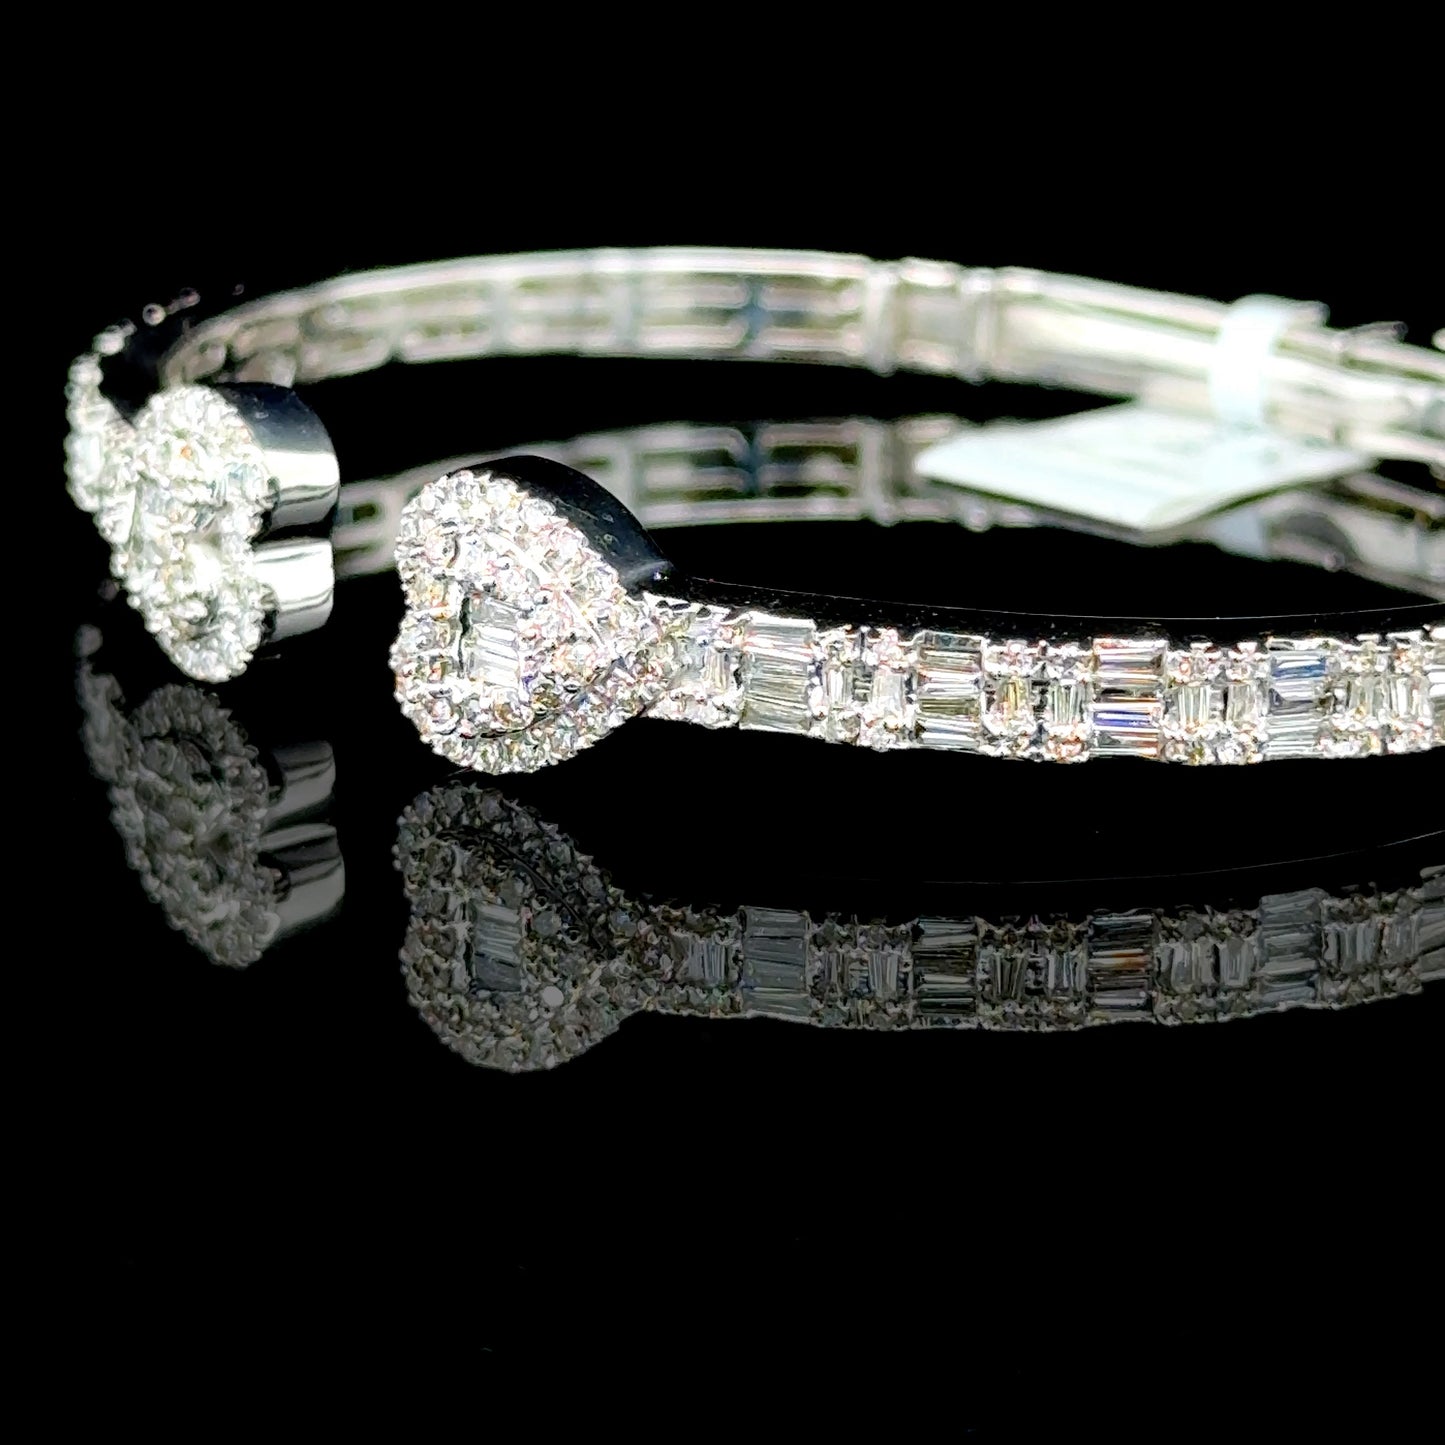 White gold bangle featuring heart design with 1.83ct diamonds